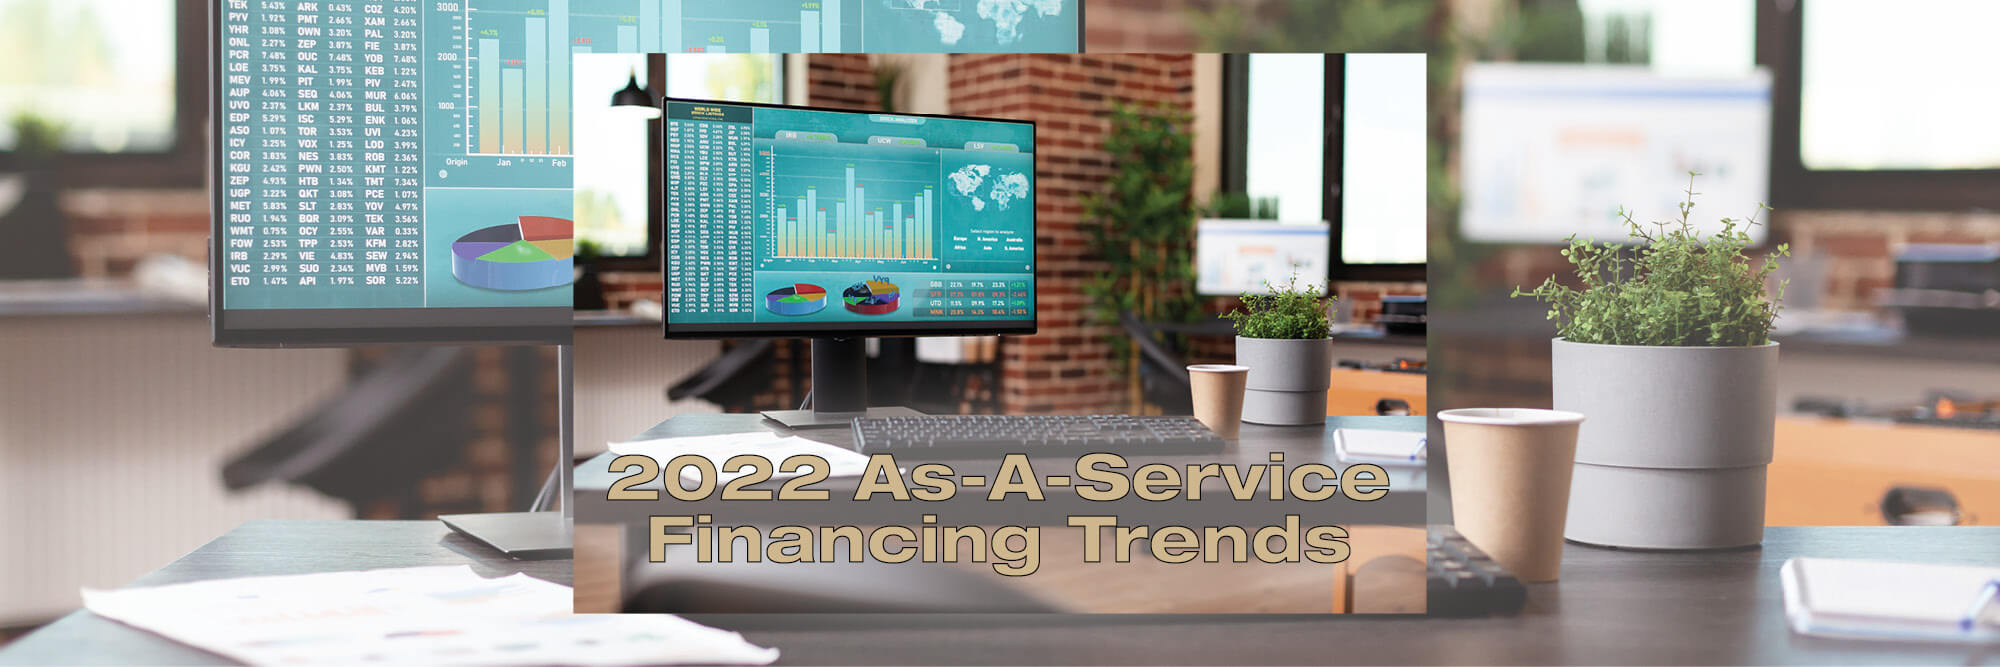 As-A-Service Financing Trends [2022]